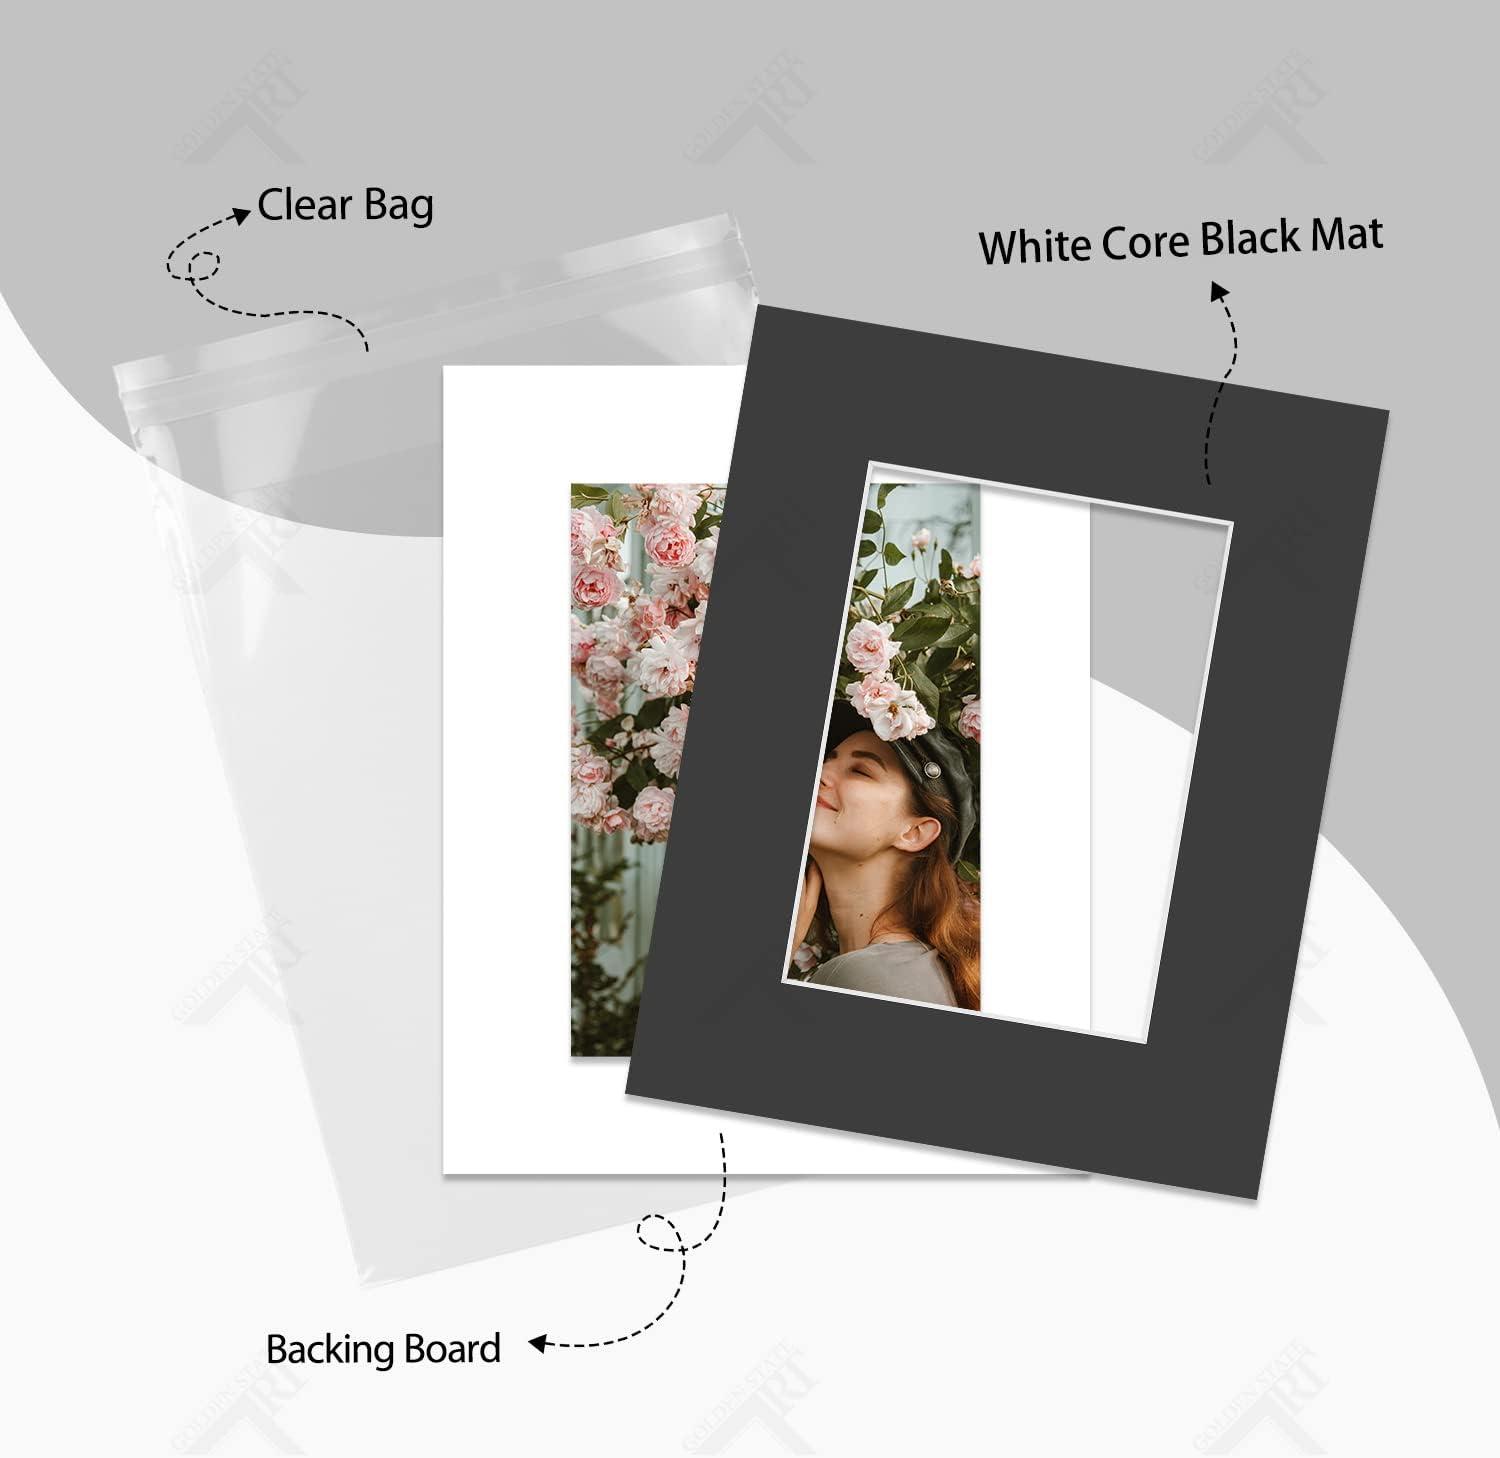 Golden State Art, Pack of 50 Black Pre-Cut 11x14 Picture Mat for 8x10 Photo with White Core Bevel Cut Mattes SETS. Includes 50 Acid-Free Bevel Cut